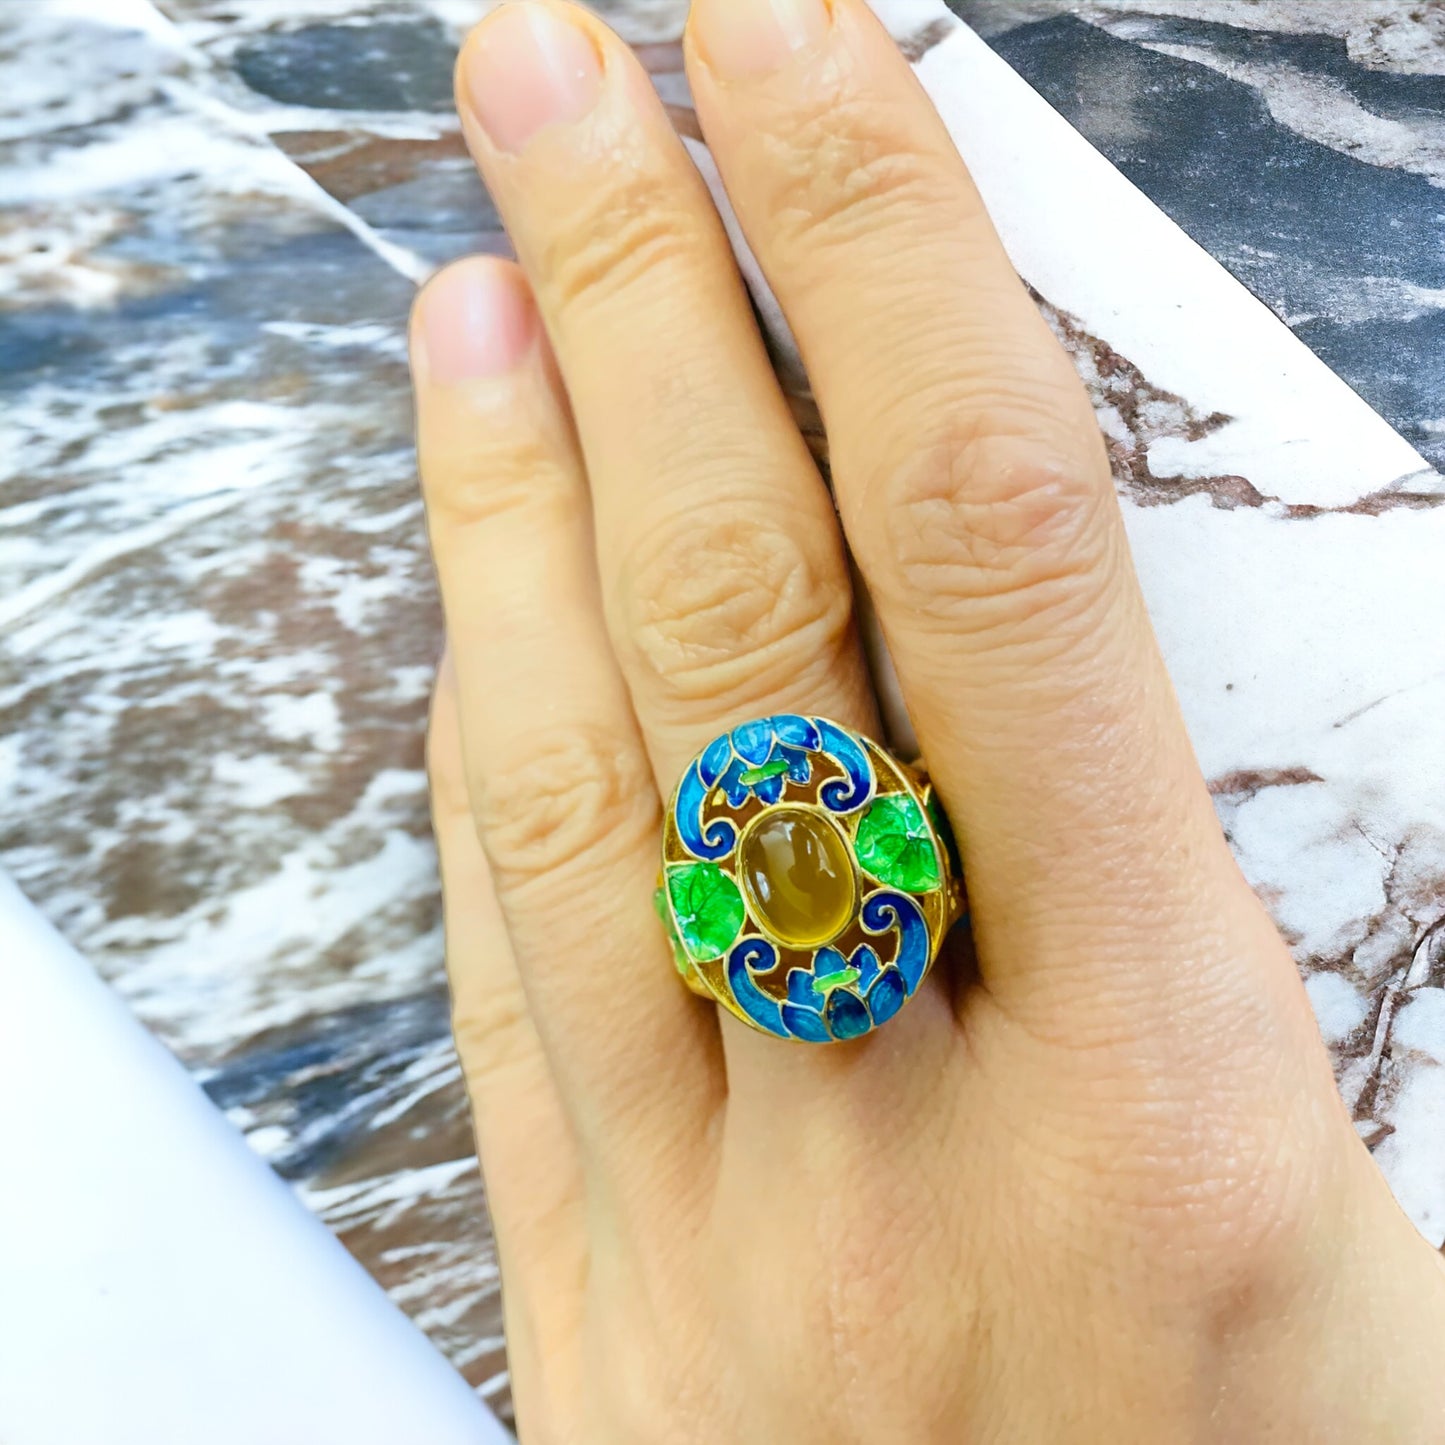 Vintage Style Cloisonne Yellow Agate Statement Ring